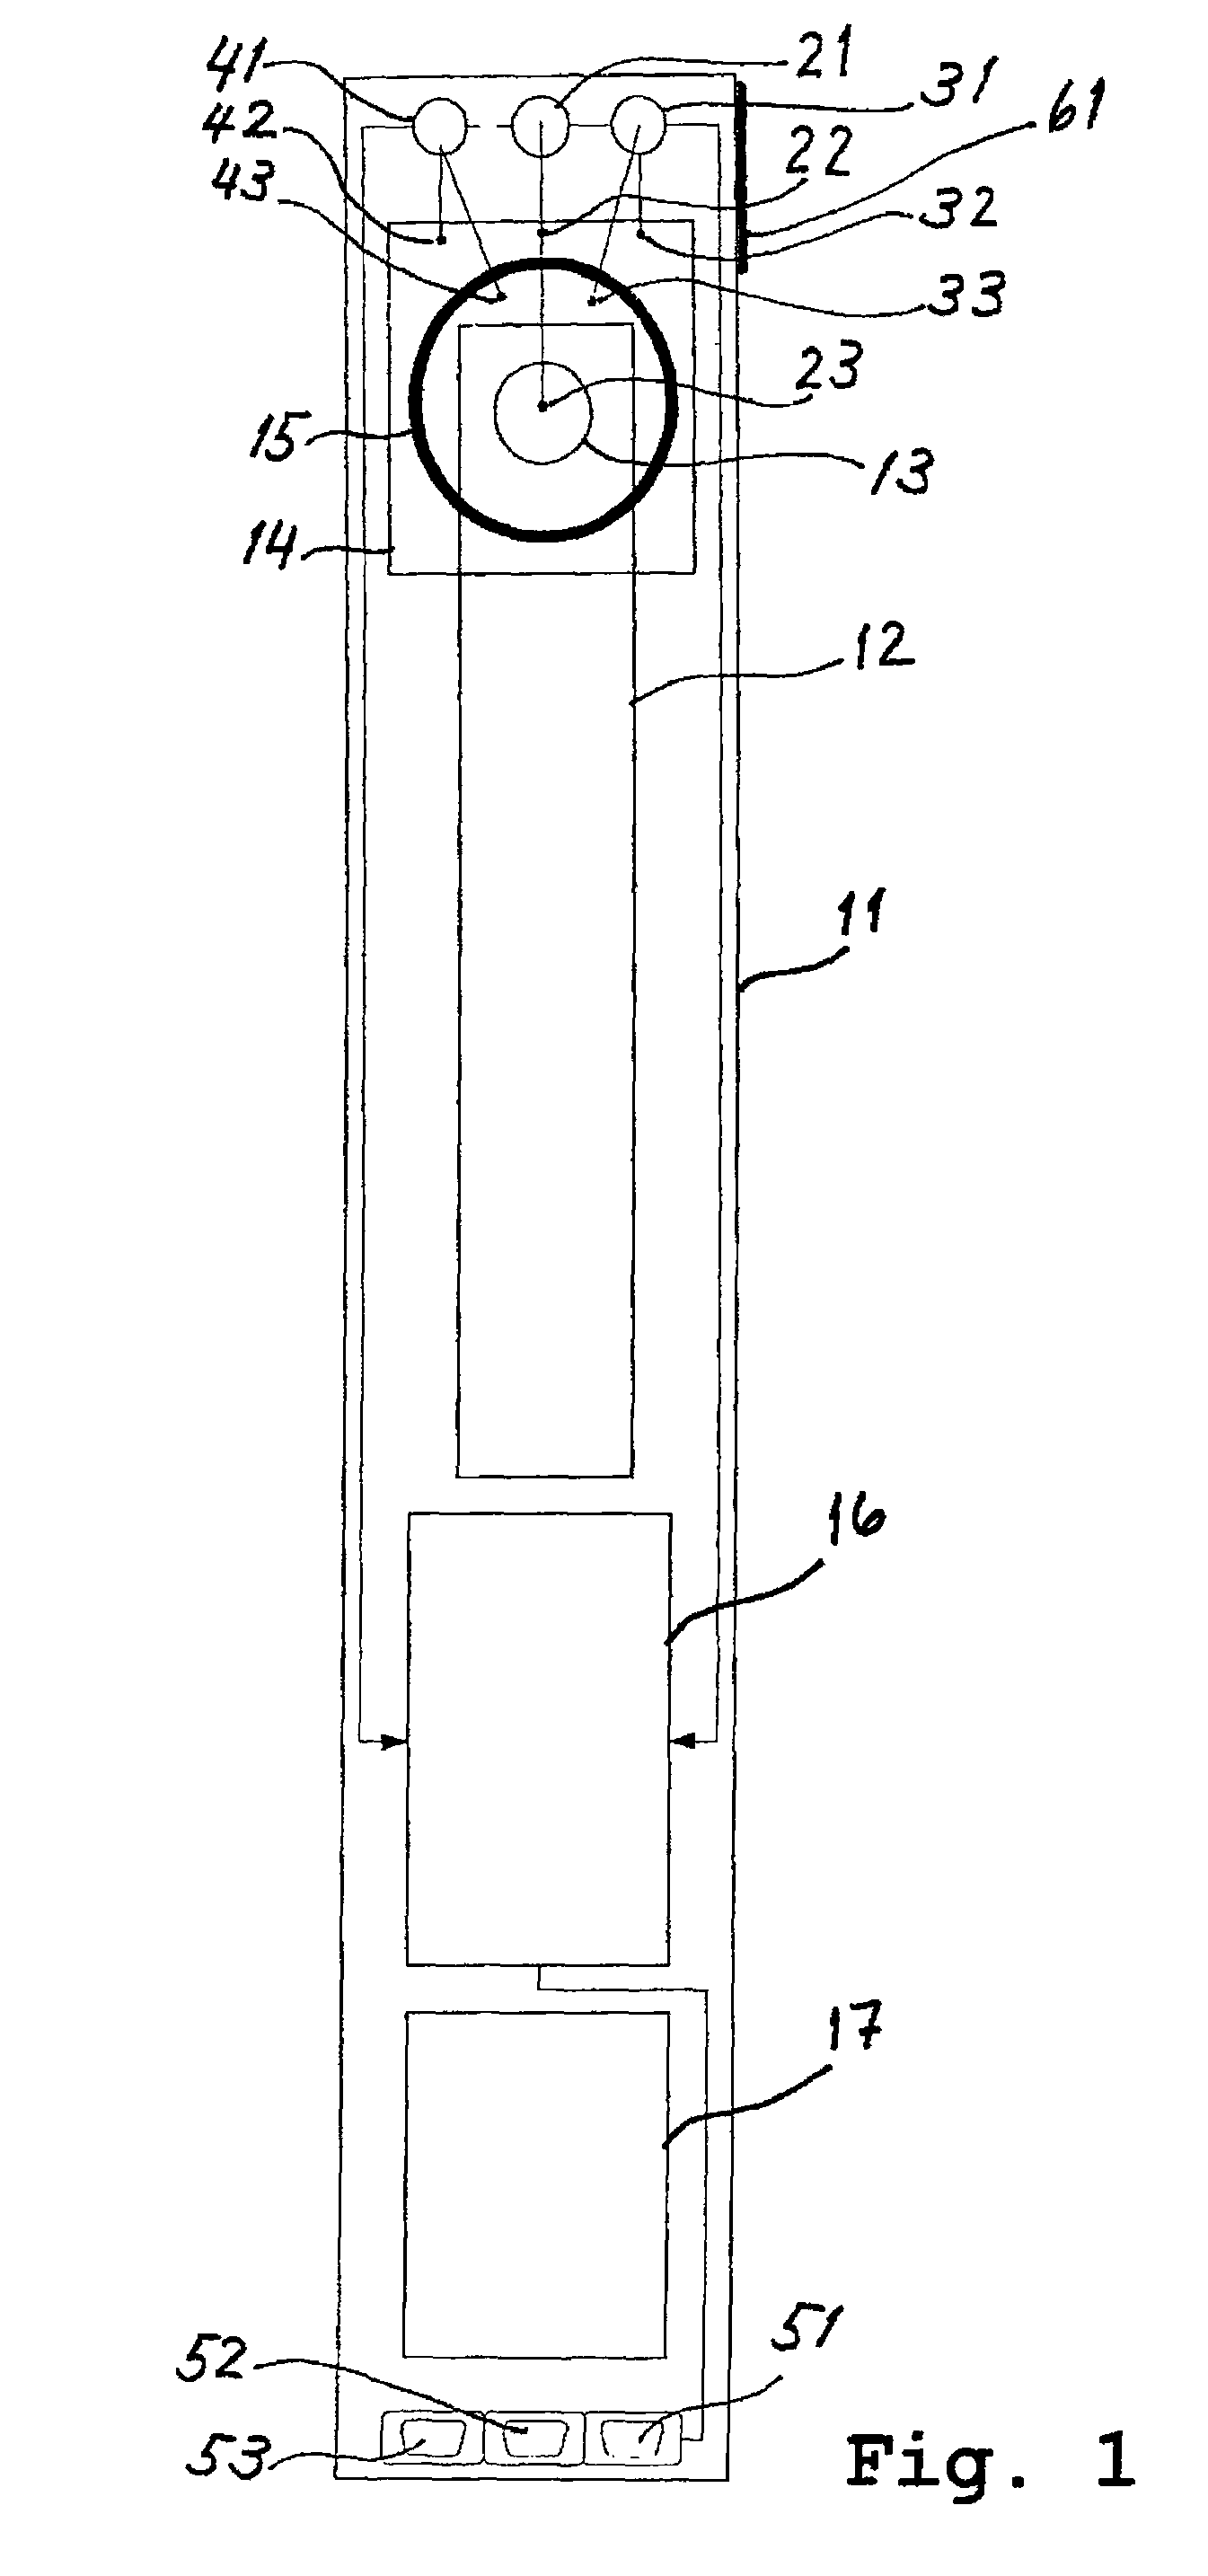 Device and method for the gravimetric determination of liquid volumes and analyzer system comprising such a device